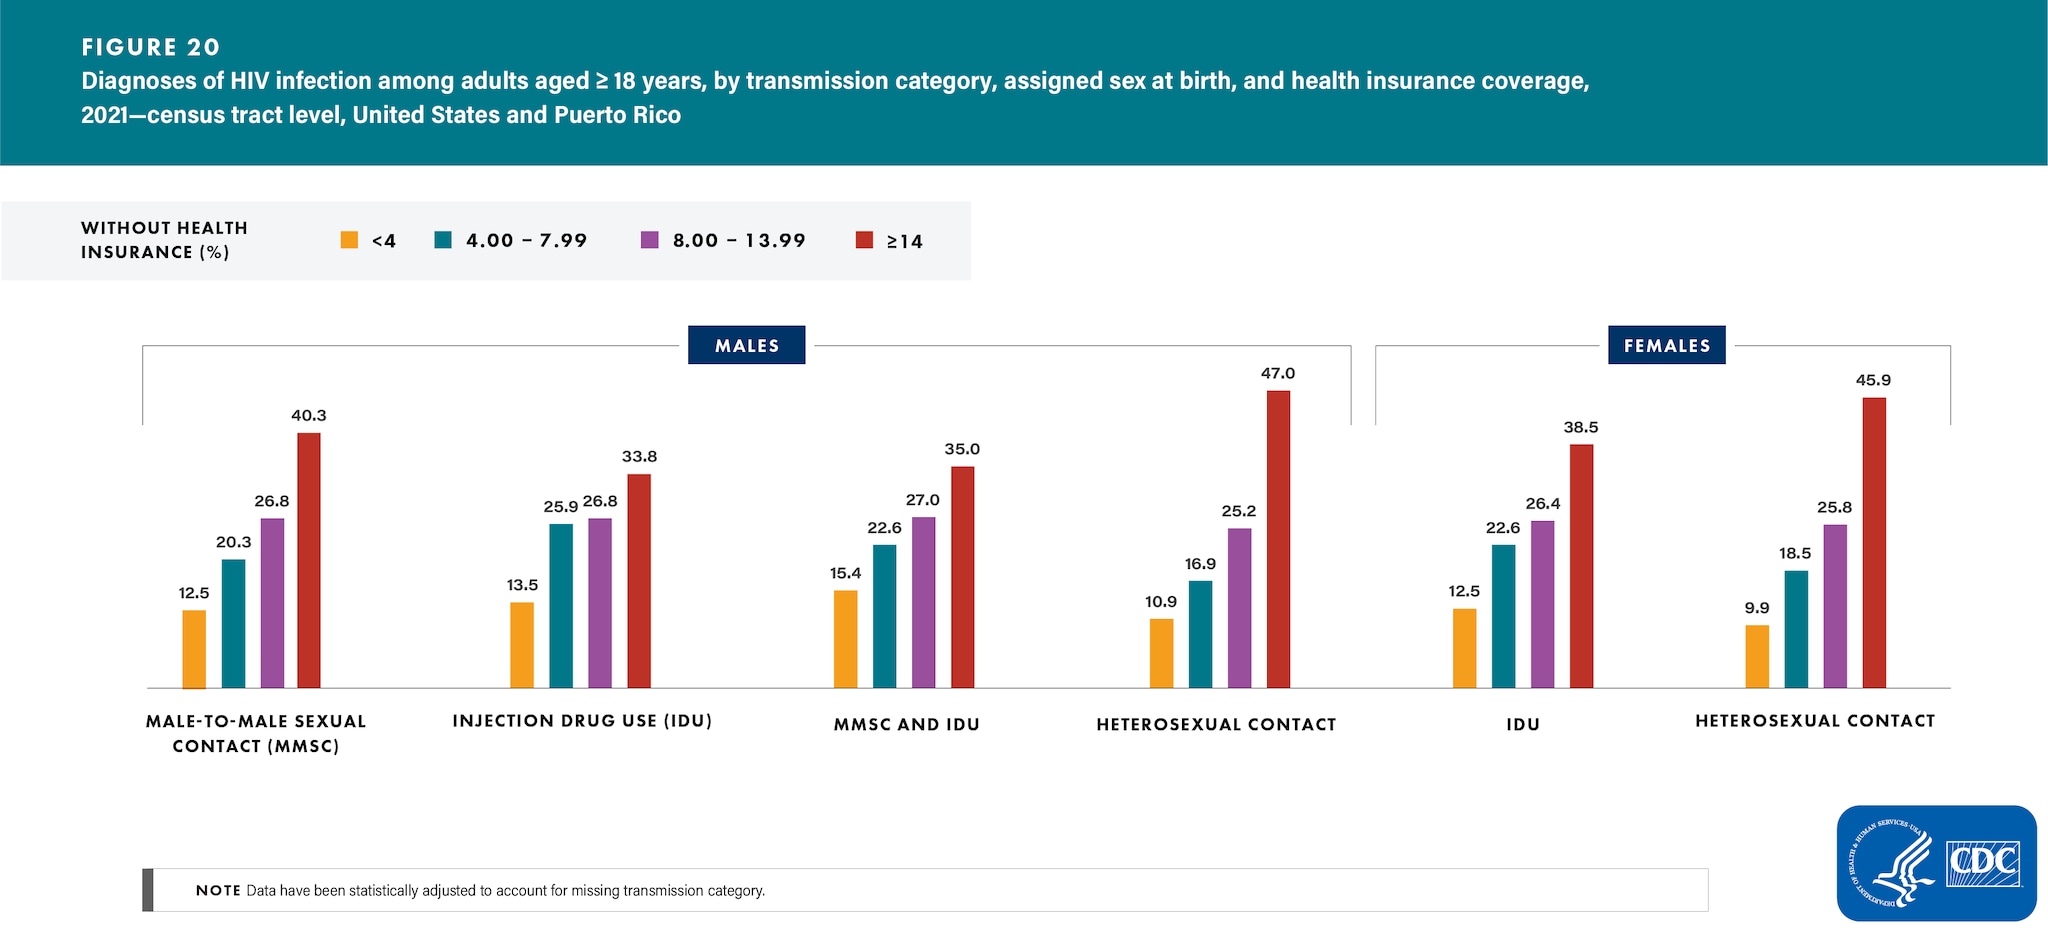 In 2021, adults who lived in census tracts with the lowest health insurance or health coverage plan (hereafter referred to as health insurance coverage) (where 14% or more of the residents did not have health insurance coverage) accounted for the highest percentages of HIV diagnoses among all transmission categories for both sexes.